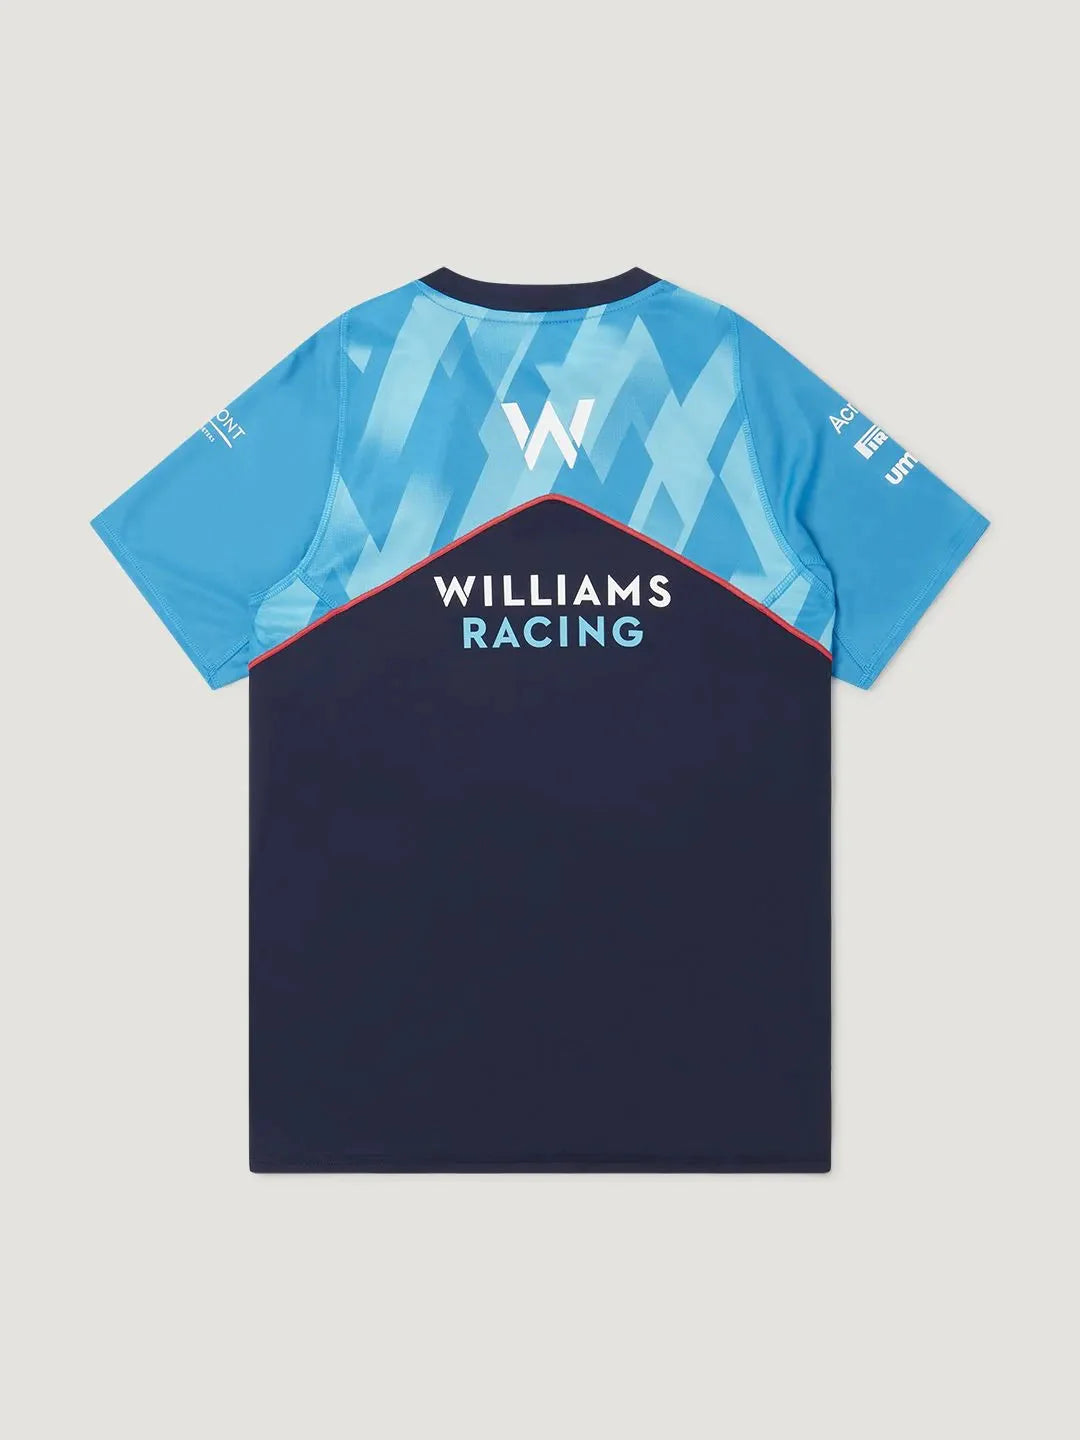 Williams Racing F1 2023 Kids Team Training Jersey - Youth Blue